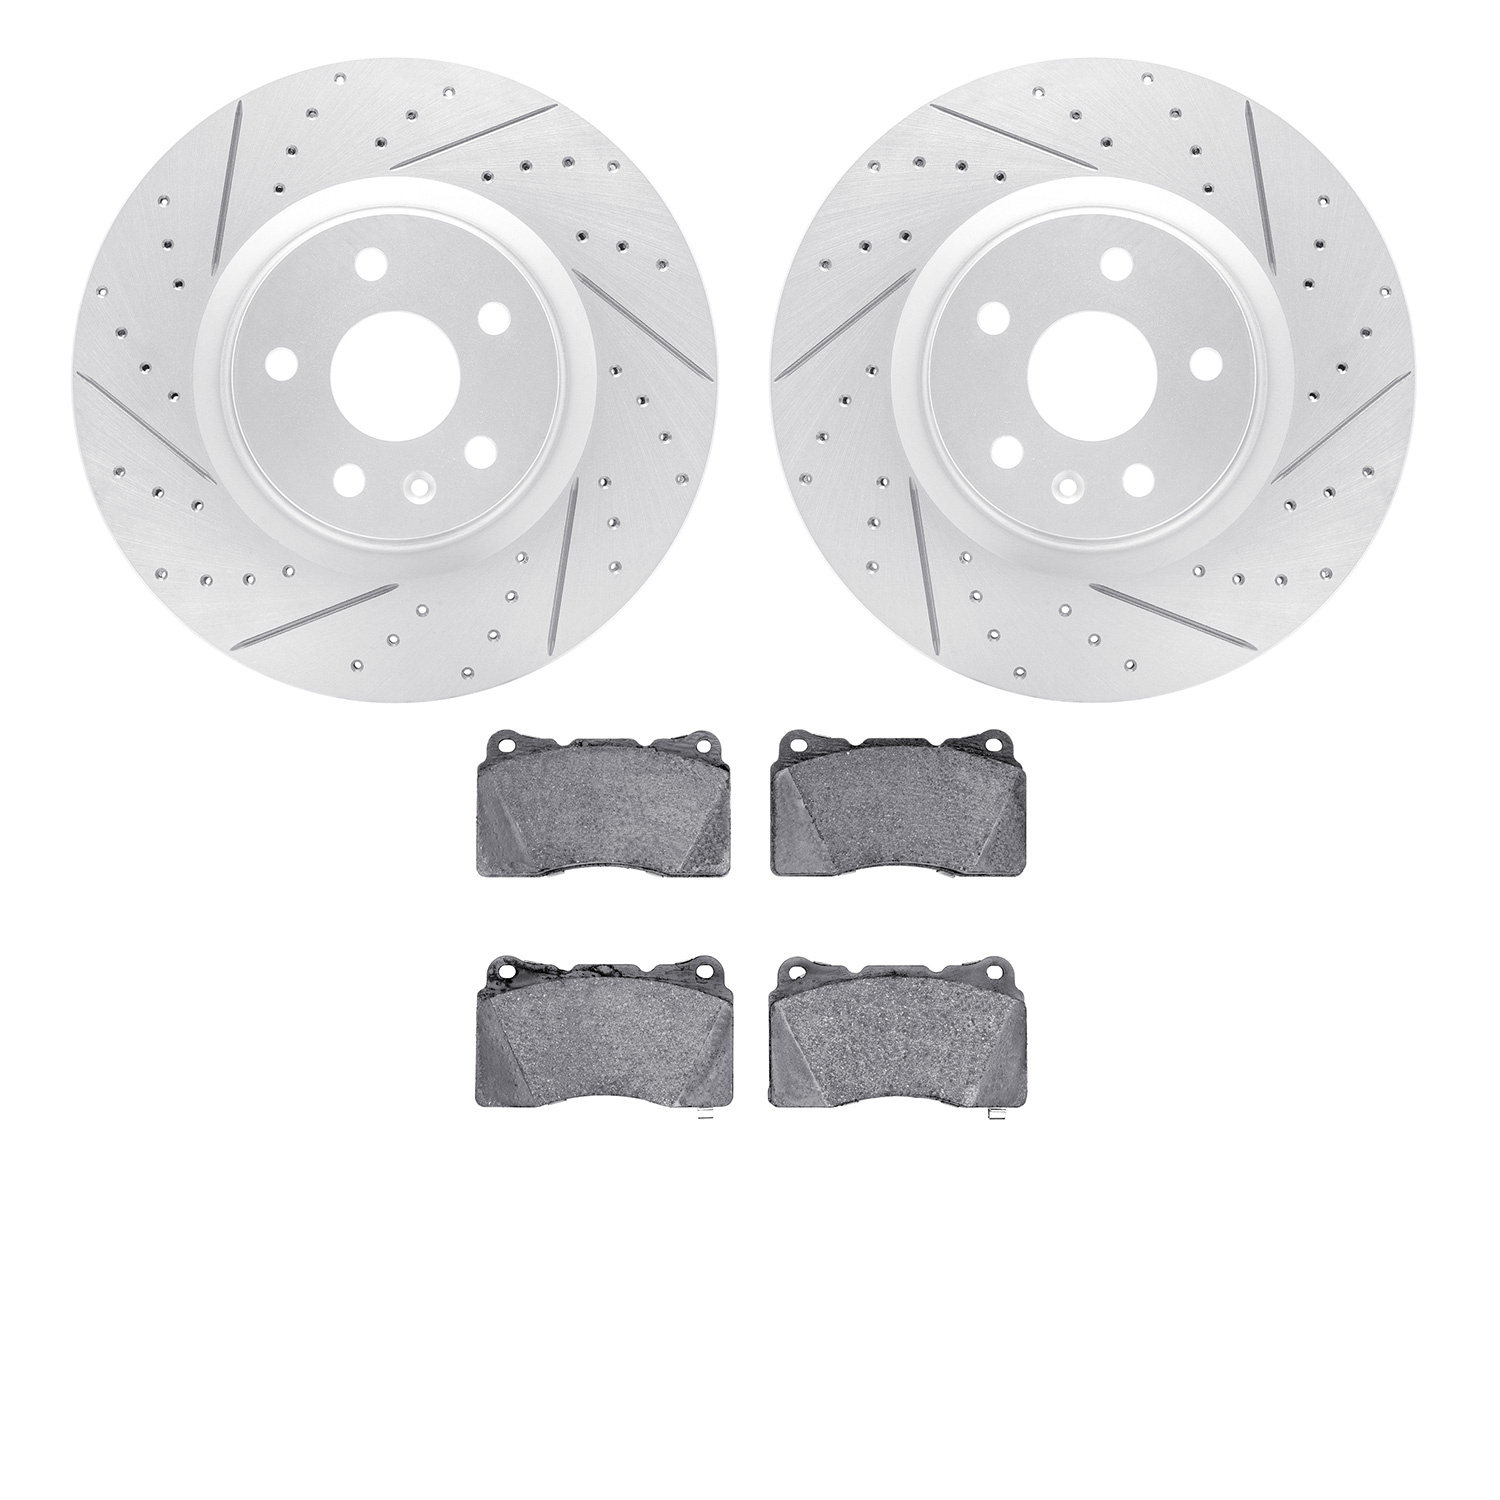 2502-45028 Geoperformance Drilled/Slotted Rotors w/5000 Advanced Brake Pads Kit, 2014-2017 GM, Position: Front